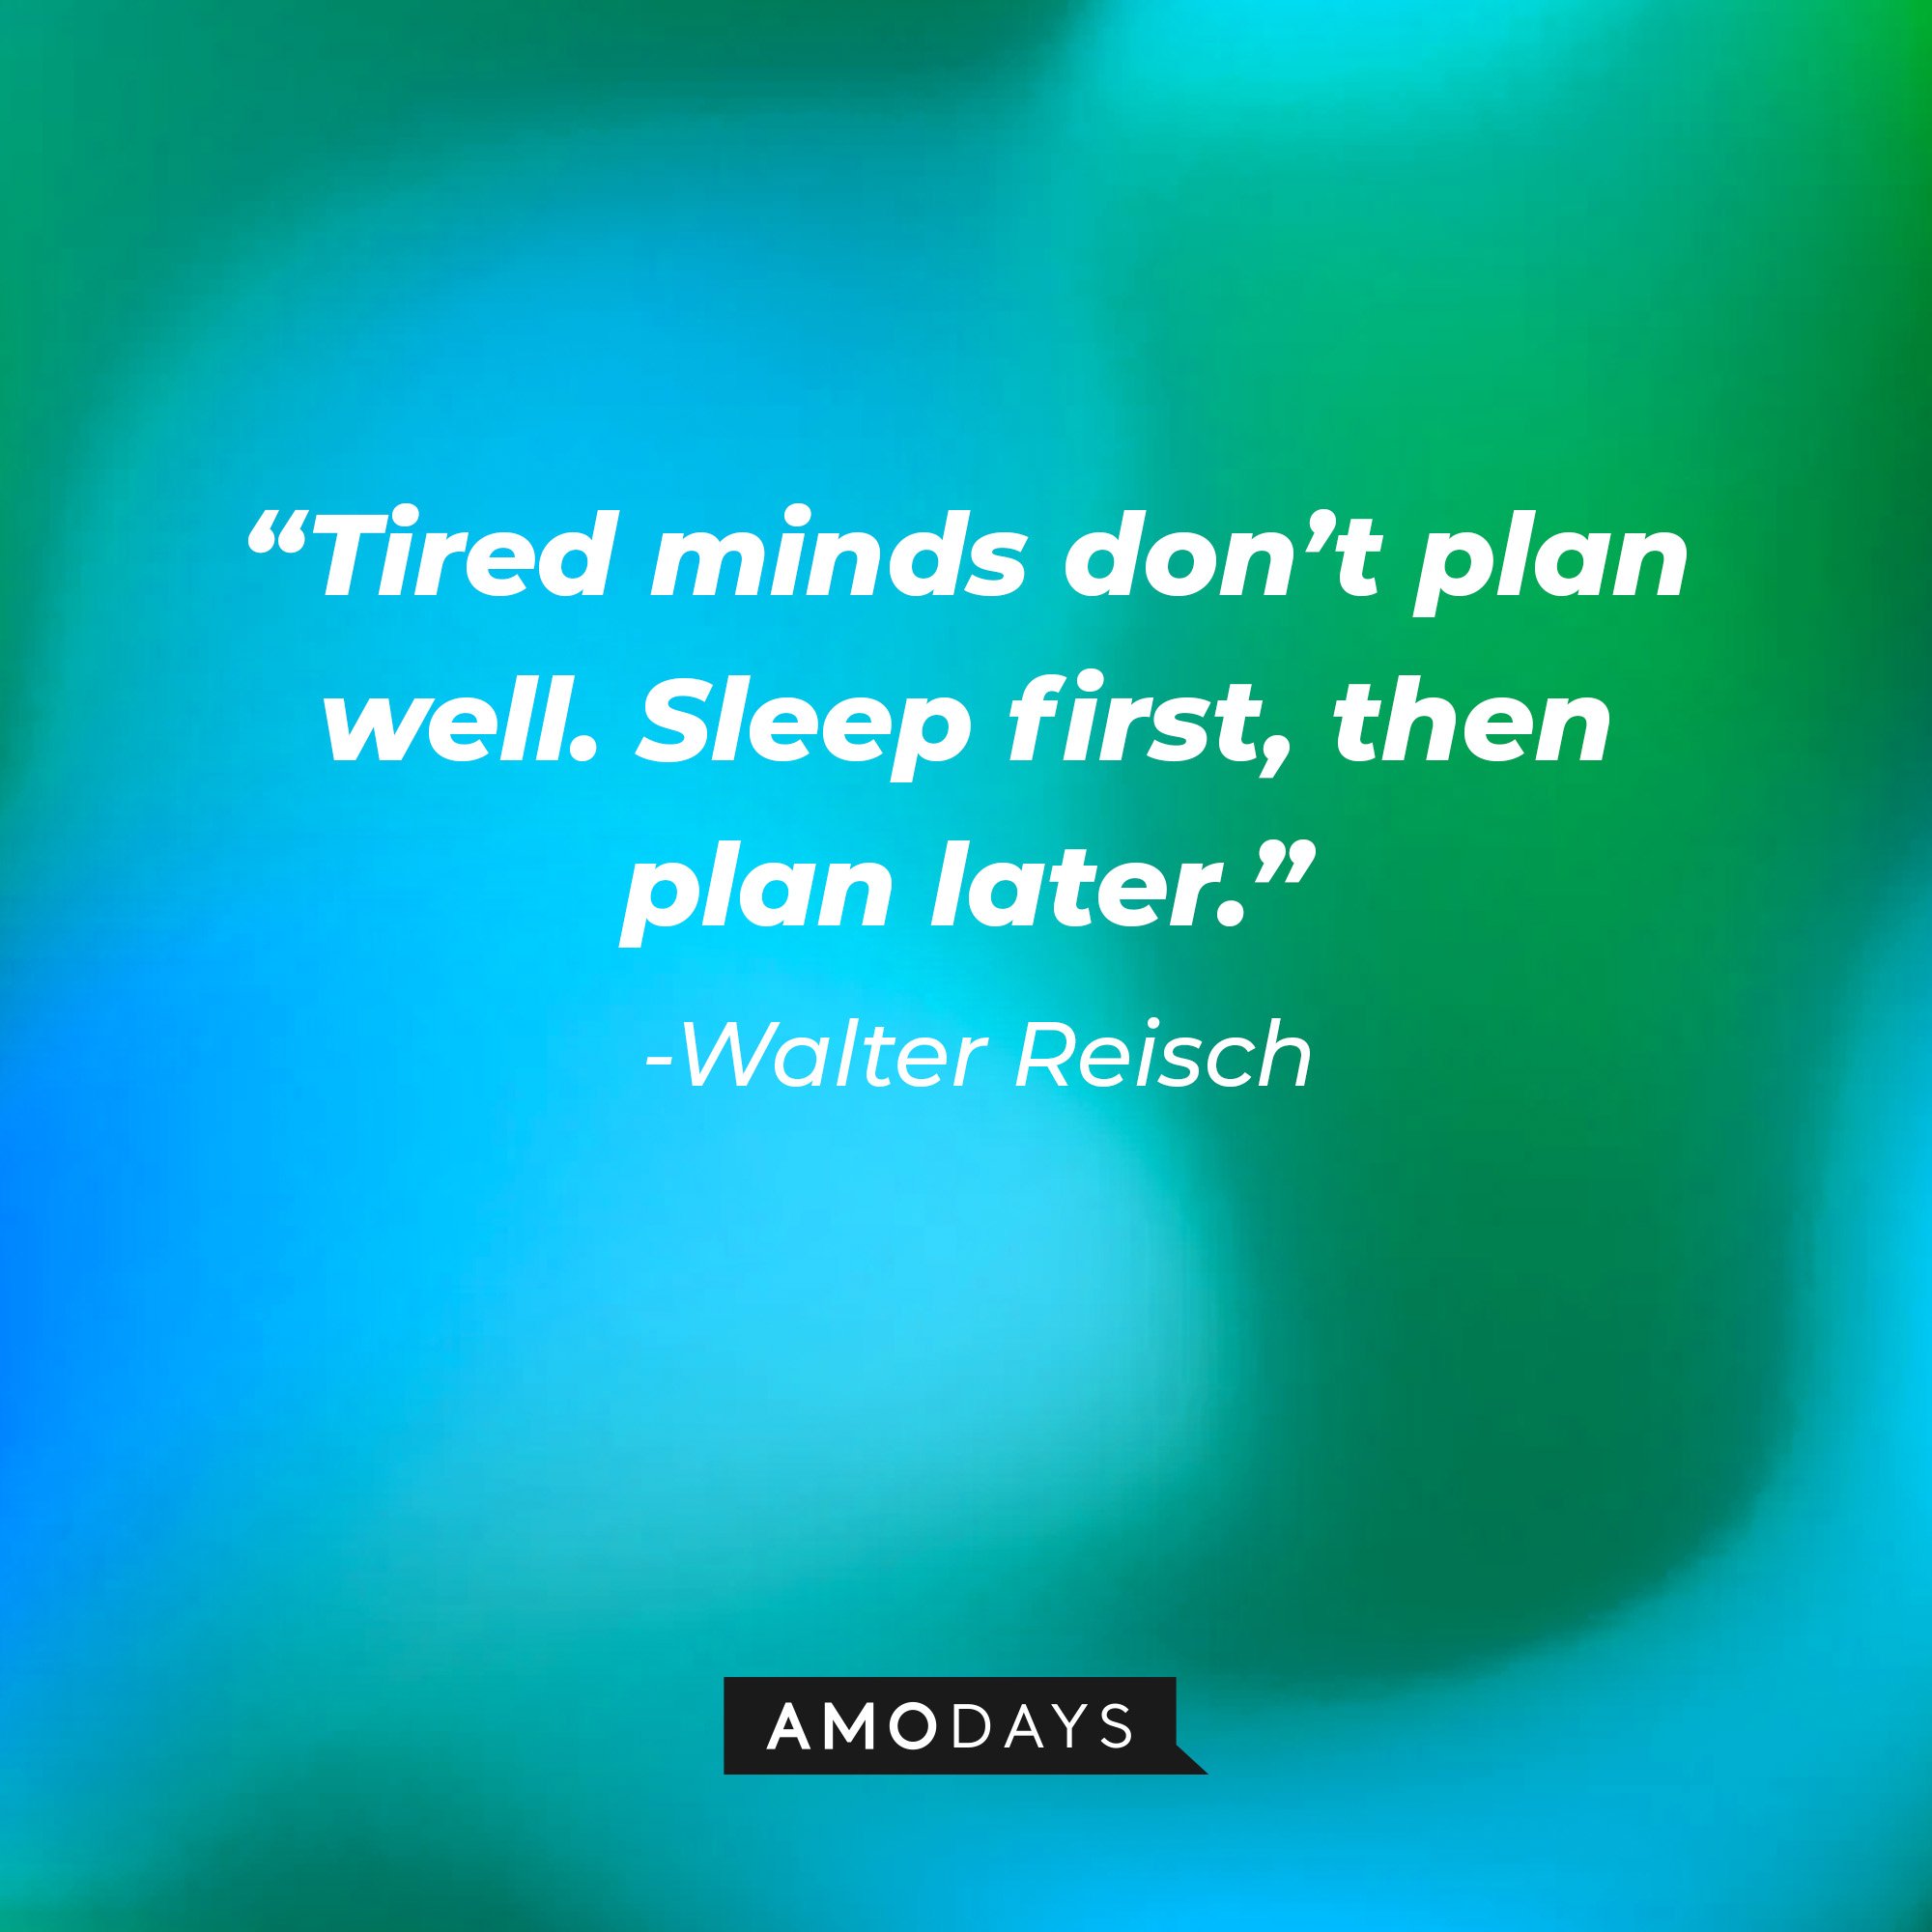  Walter Reisch's quote: “Tired minds don’t plan well. Sleep first, then plan later.” | Image: AmoDays